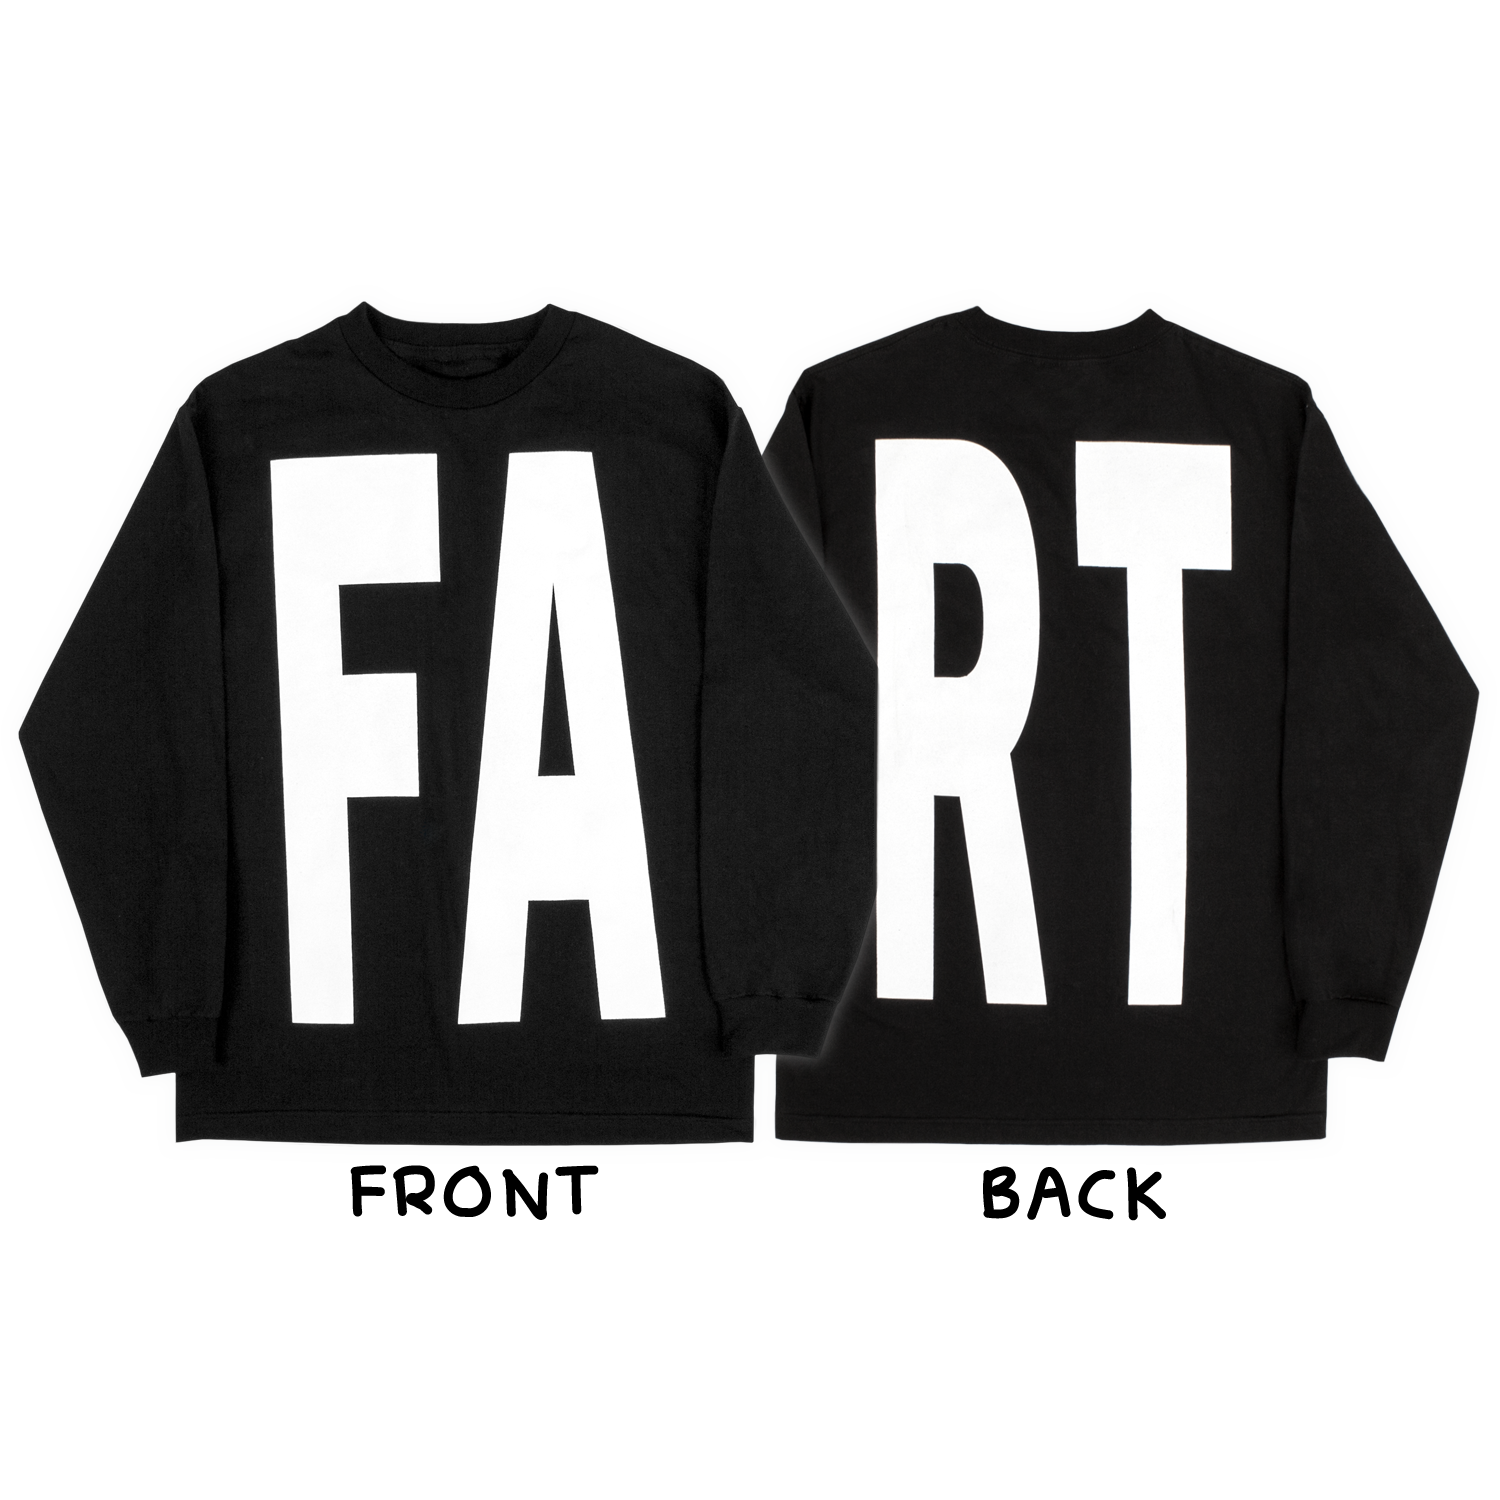 FART by Pizzaslime & The Fat Jew Long Sleeve Shirt + FREE GIFT  [PREORDER]